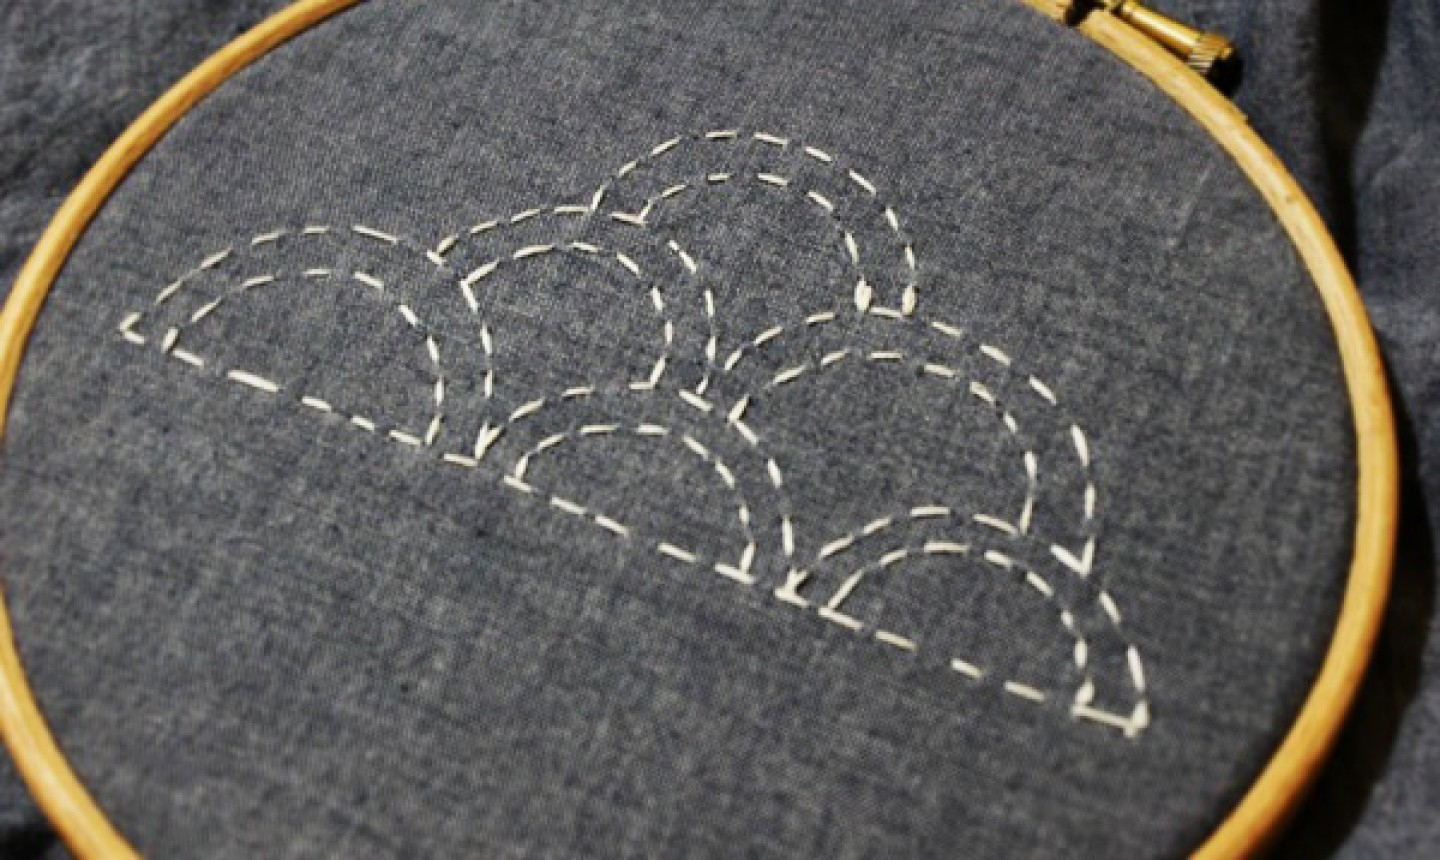 Sashiko Embroidery Patterns Free Learn Simple Sashiko Embroidery With This Whimsical Cloud Pattern